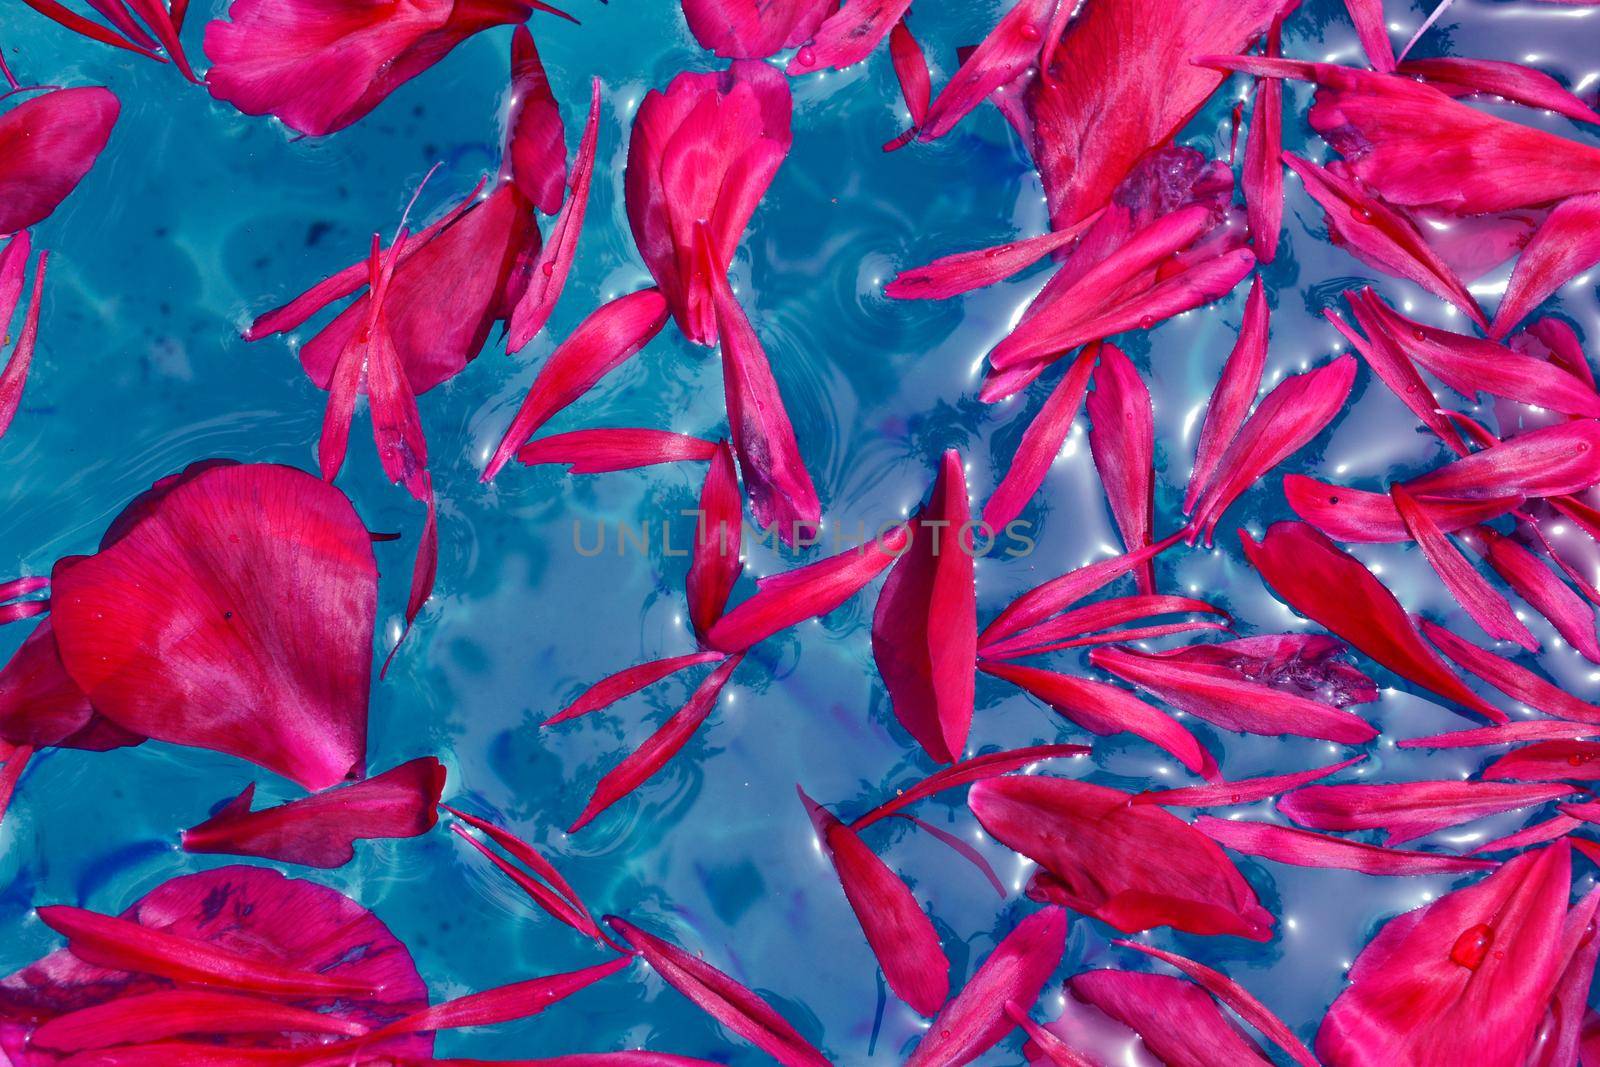 Peony petals floating on blue water by hibrida13